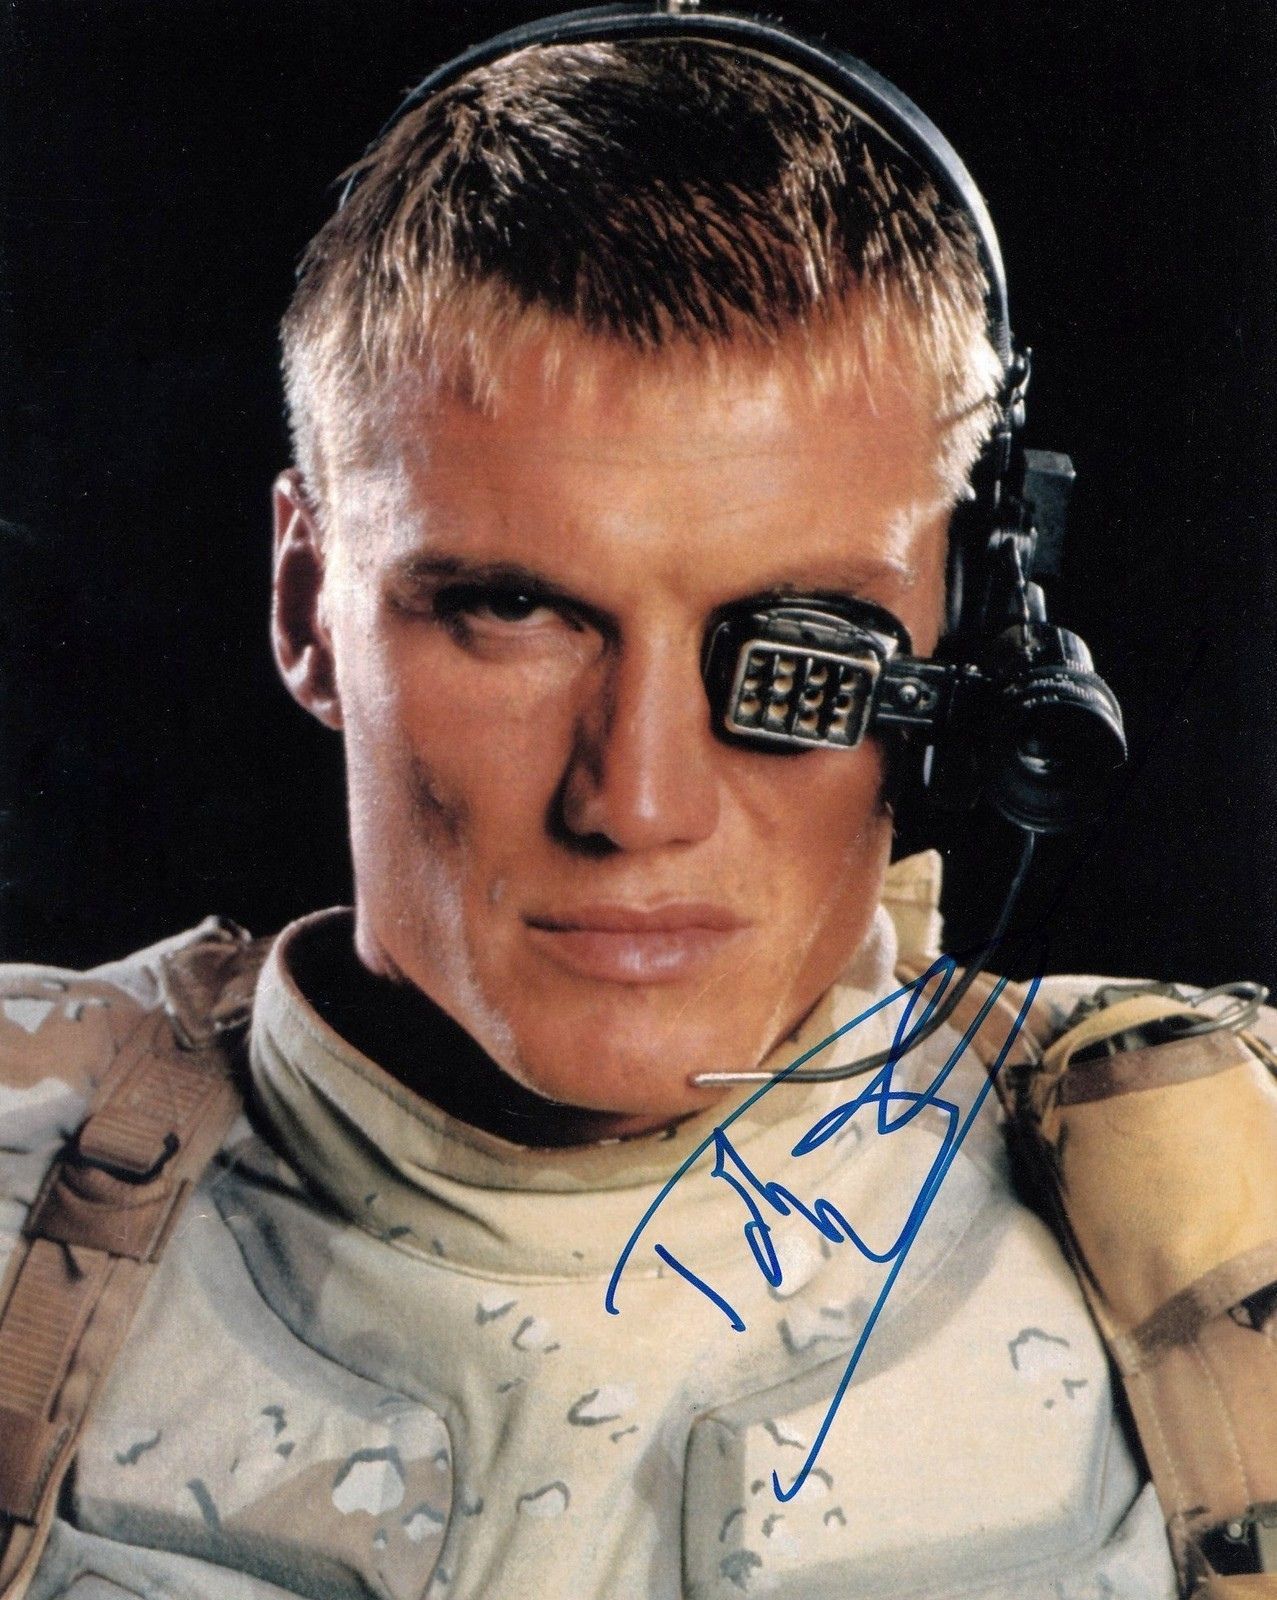 Universal Soldier autograph. Dolph lundgren, Action movie stars, The expendables